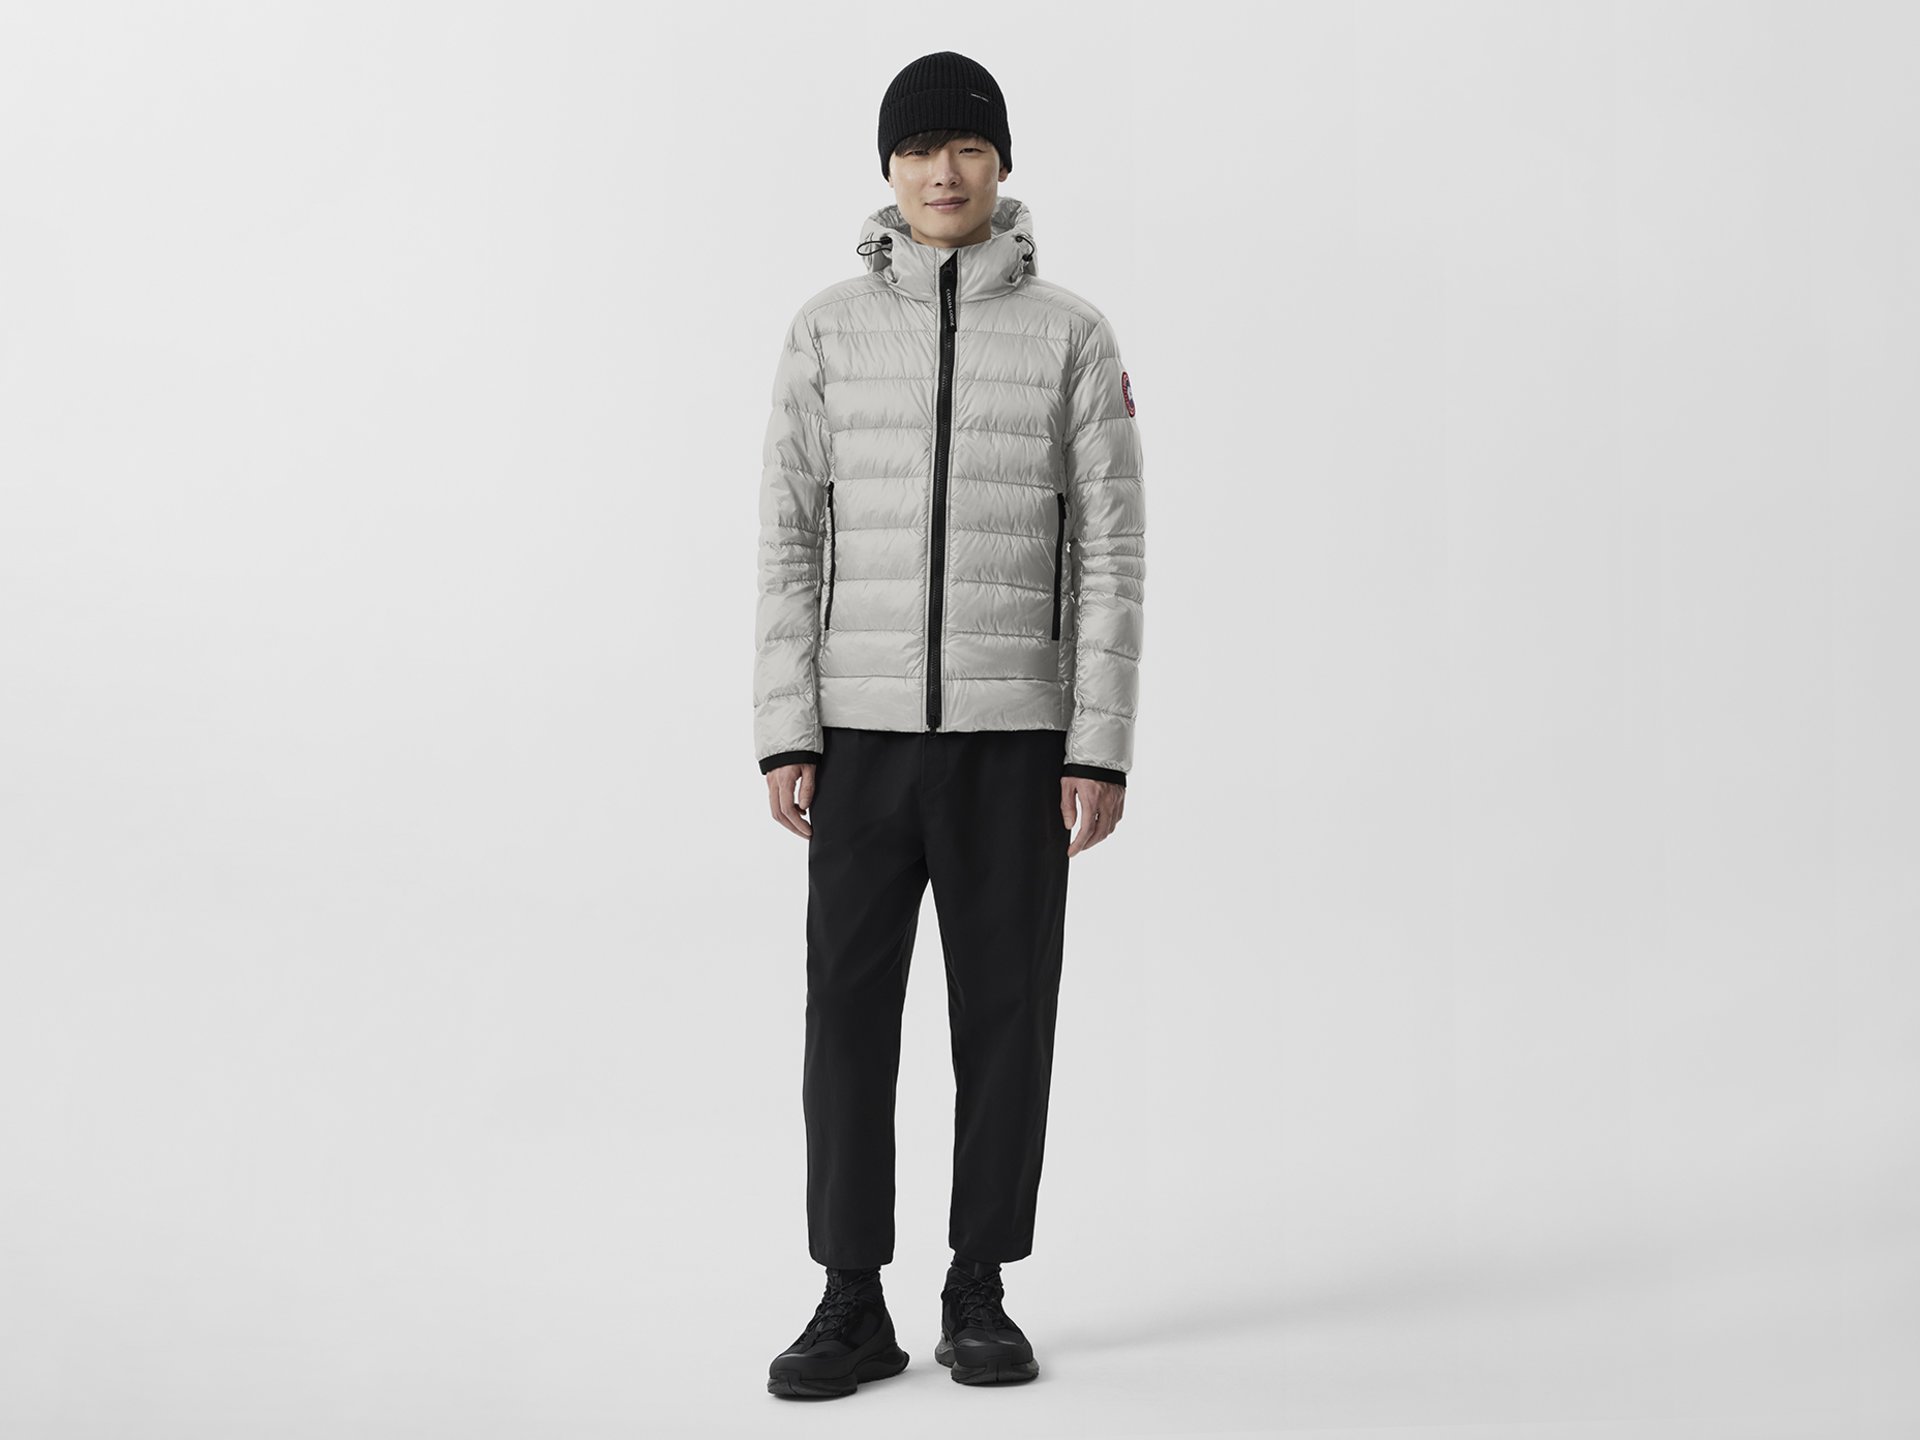 Unlock Wilderness' choice in the Canada Goose Vs North Face comparison, the Crofton Hoody by Canada Goose